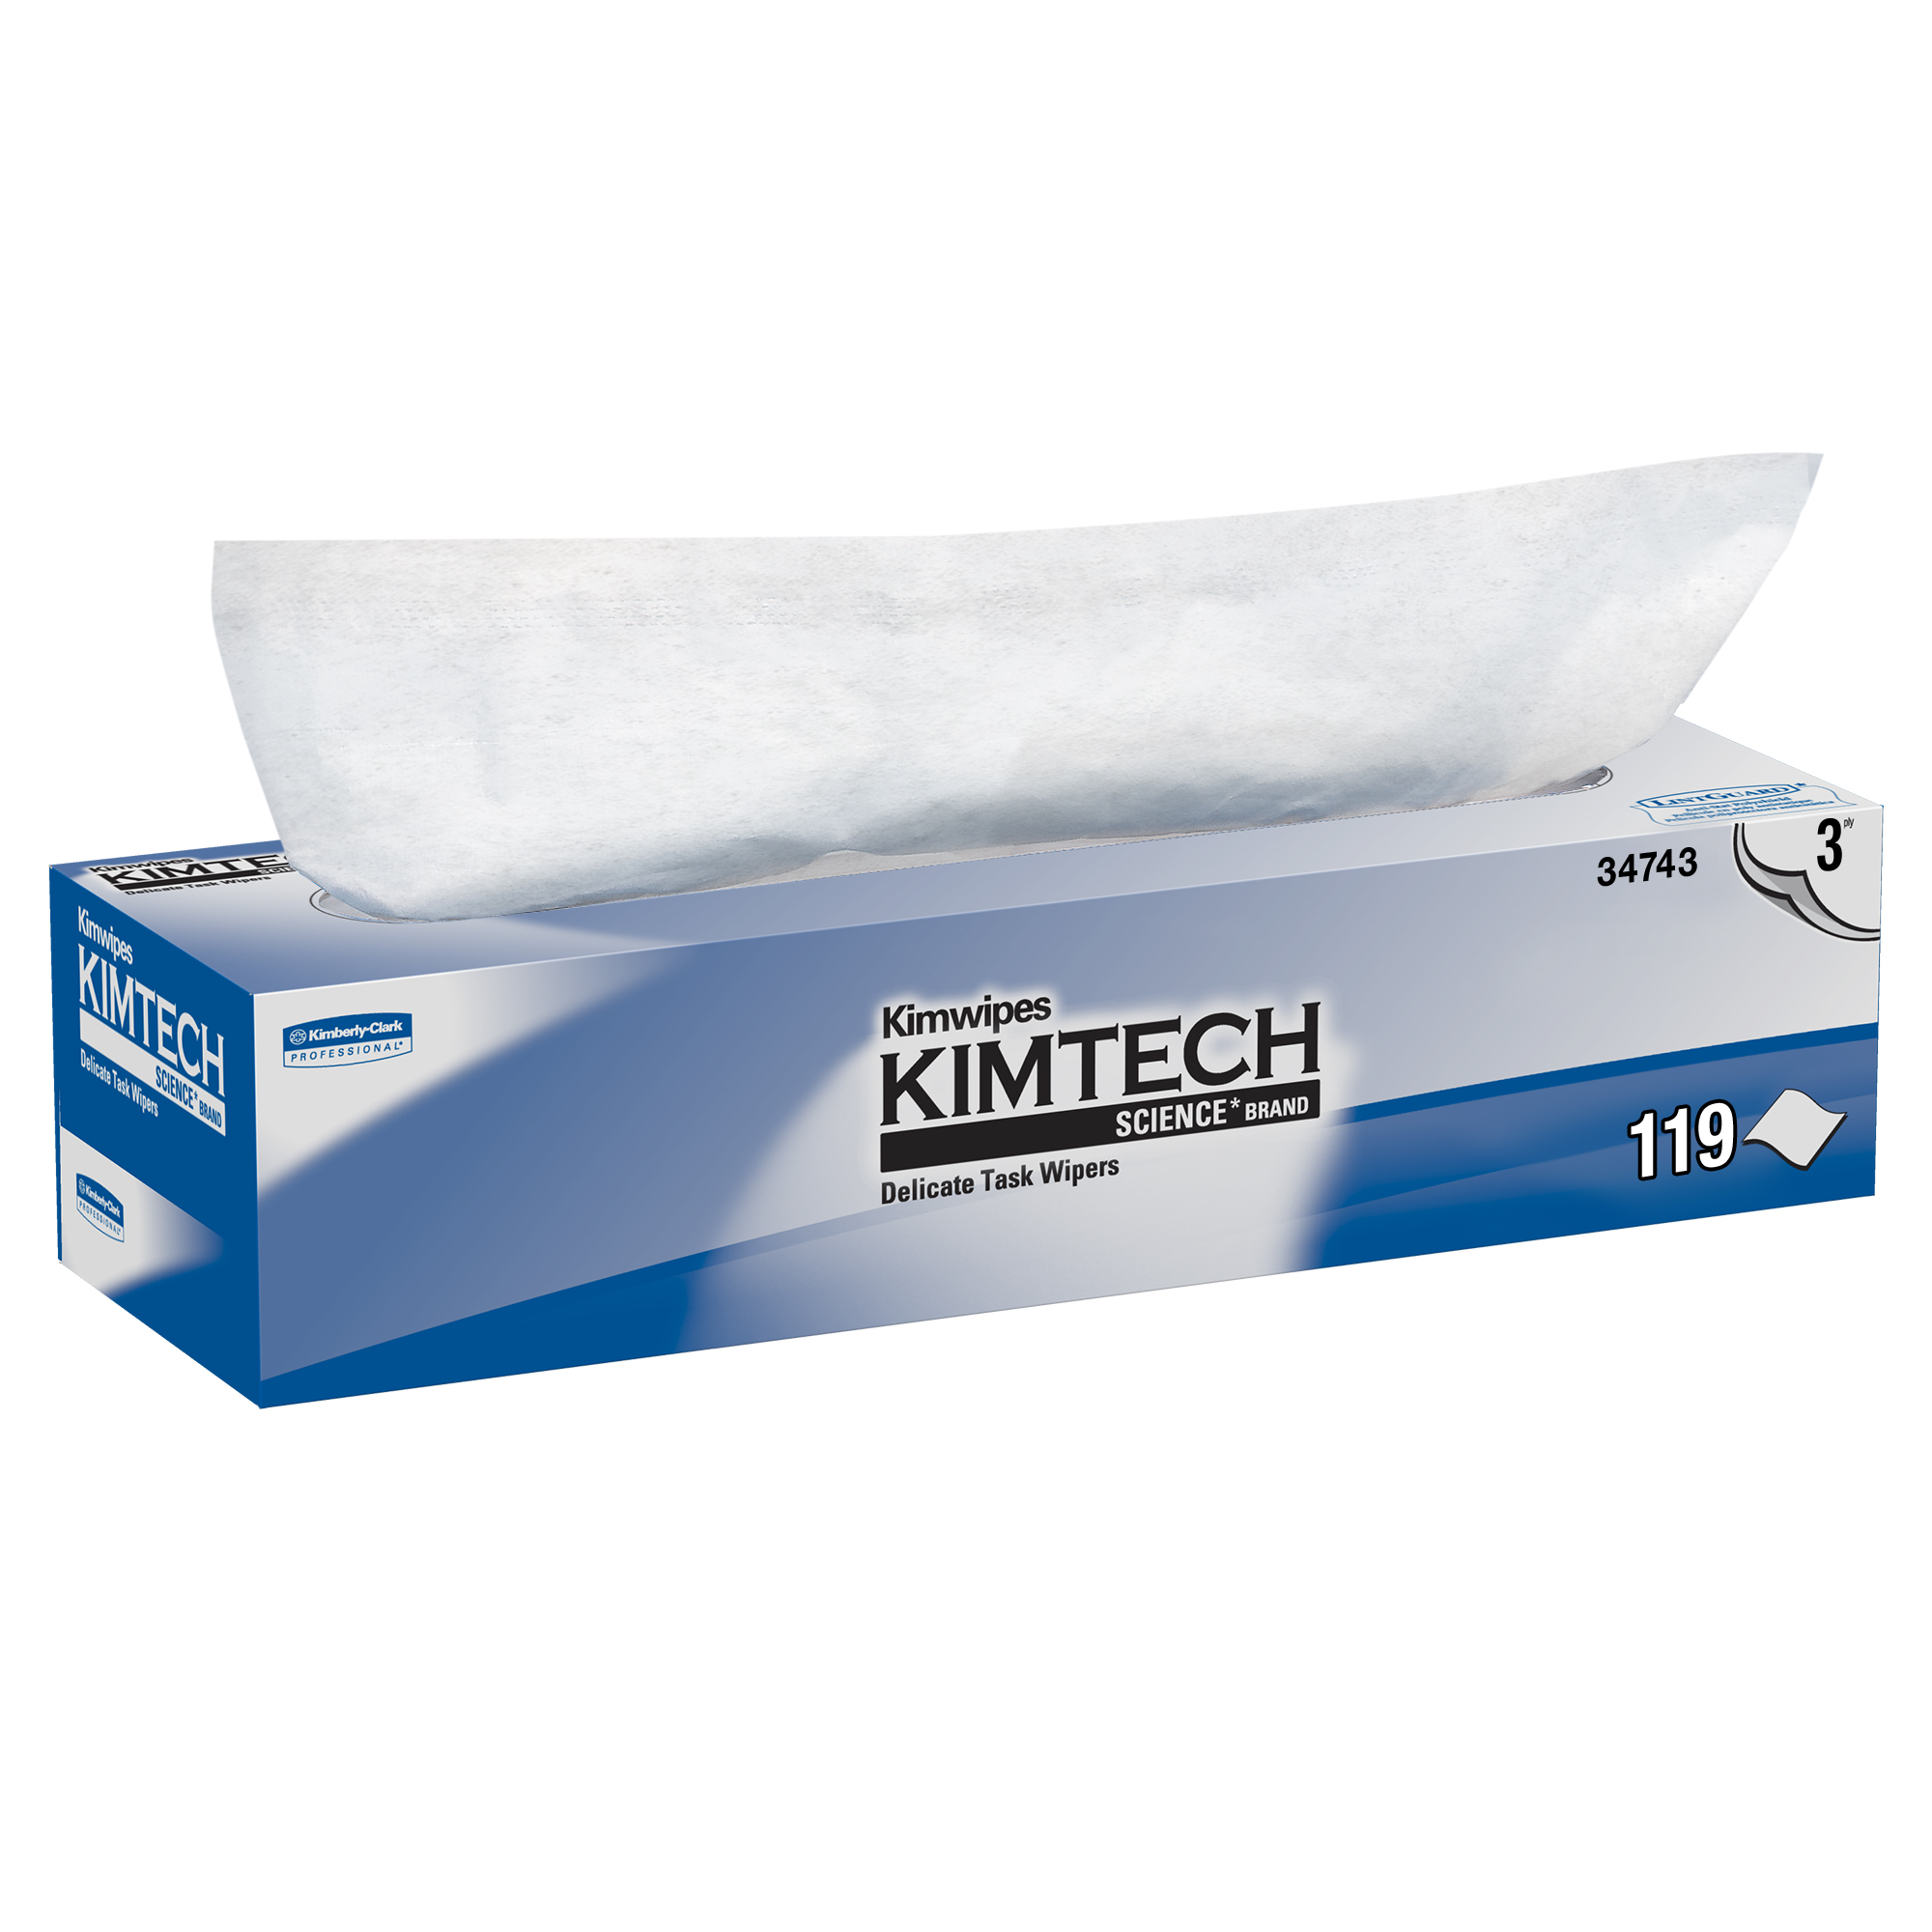 Picture of KIMWIPES Delicate Task Wipers, 3-Ply, 11 4/5 x 11 4/5, 119/Box, 15 Boxes/Carton